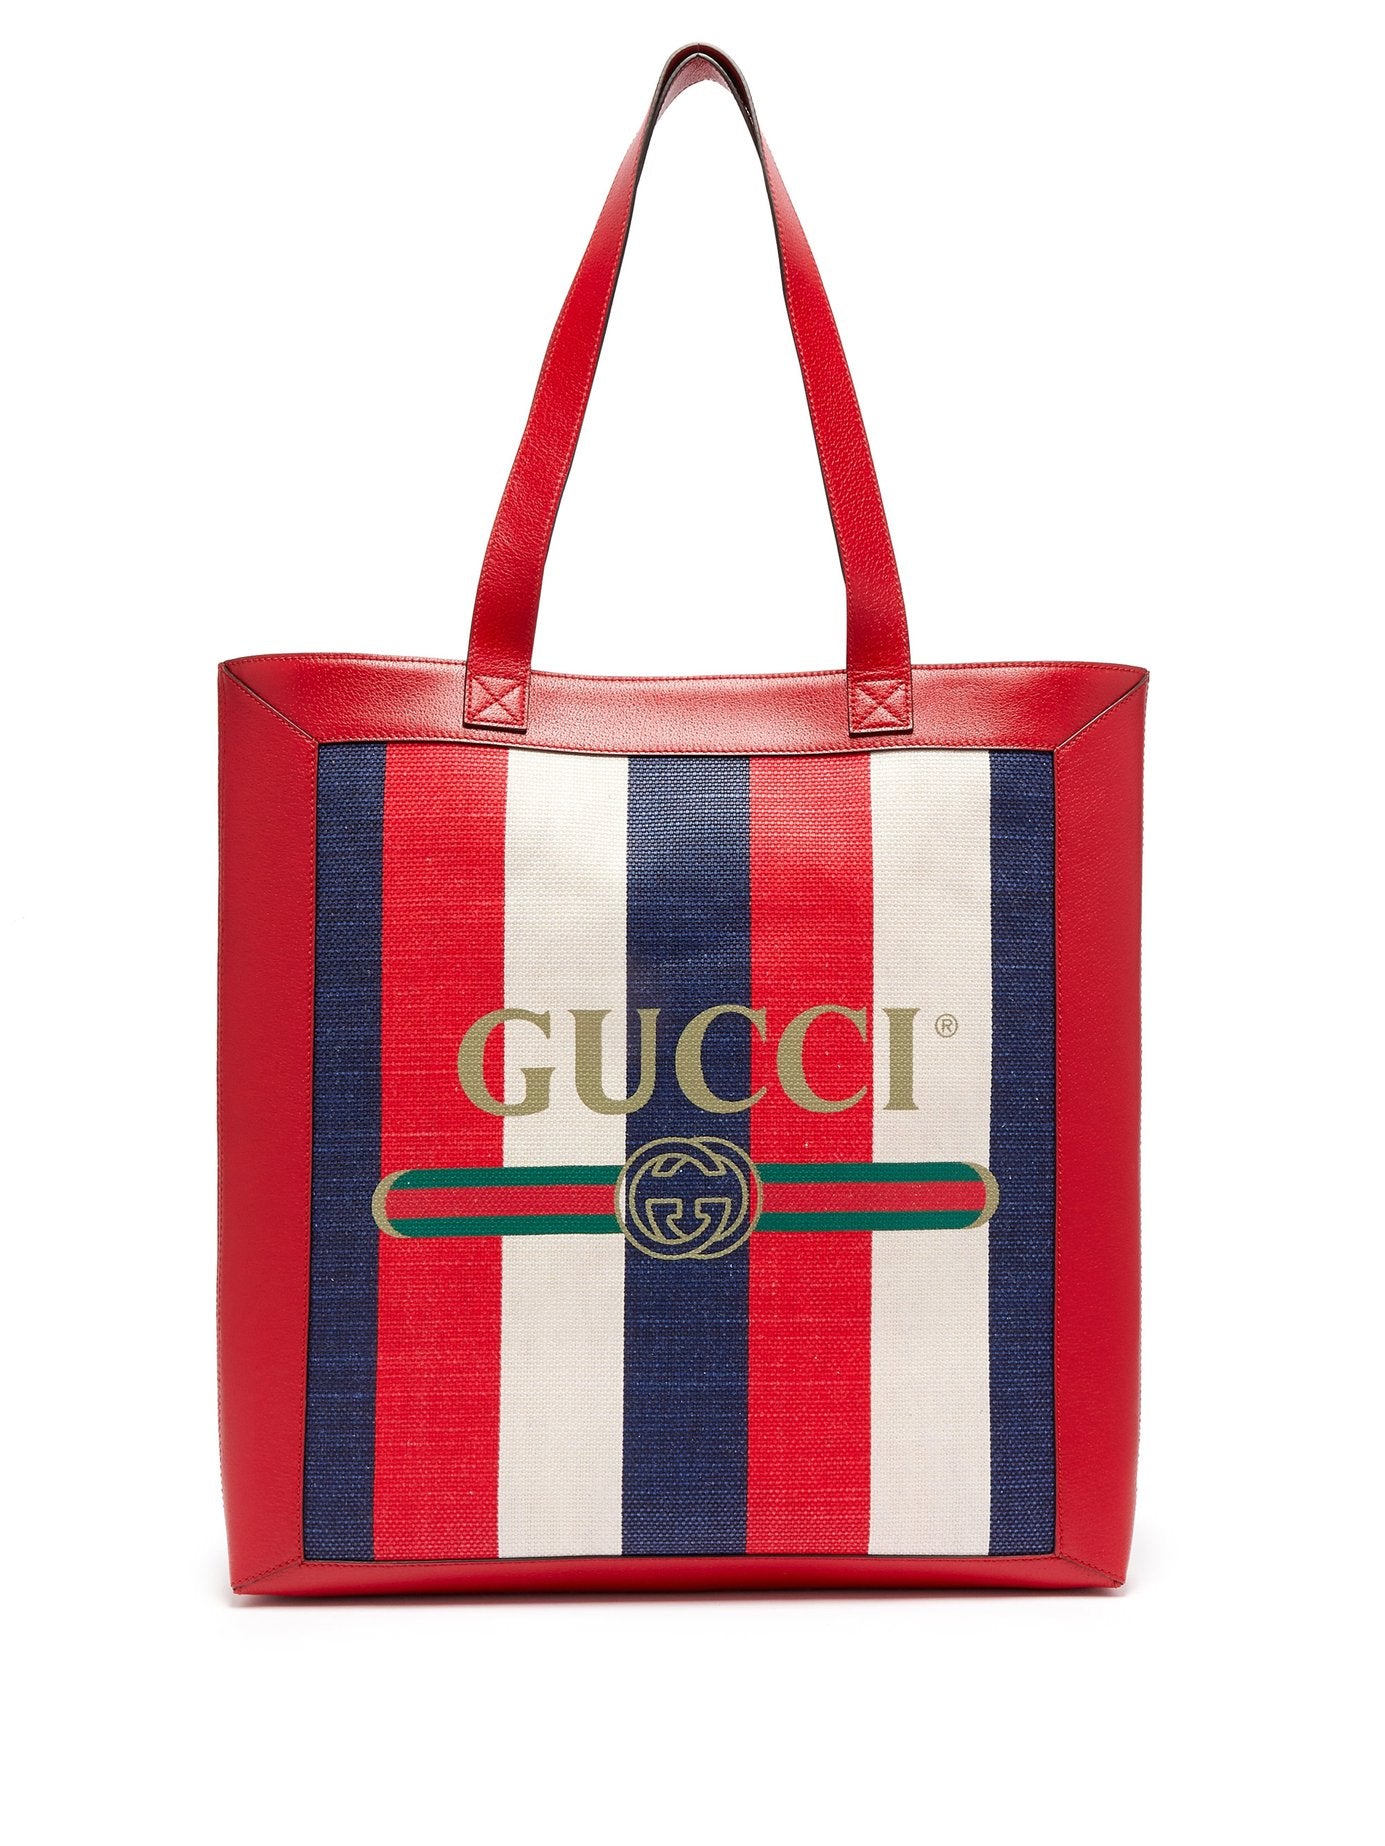 Gucci Striped Large Tote Bag Red, Blue And White – The Luxury Shopper